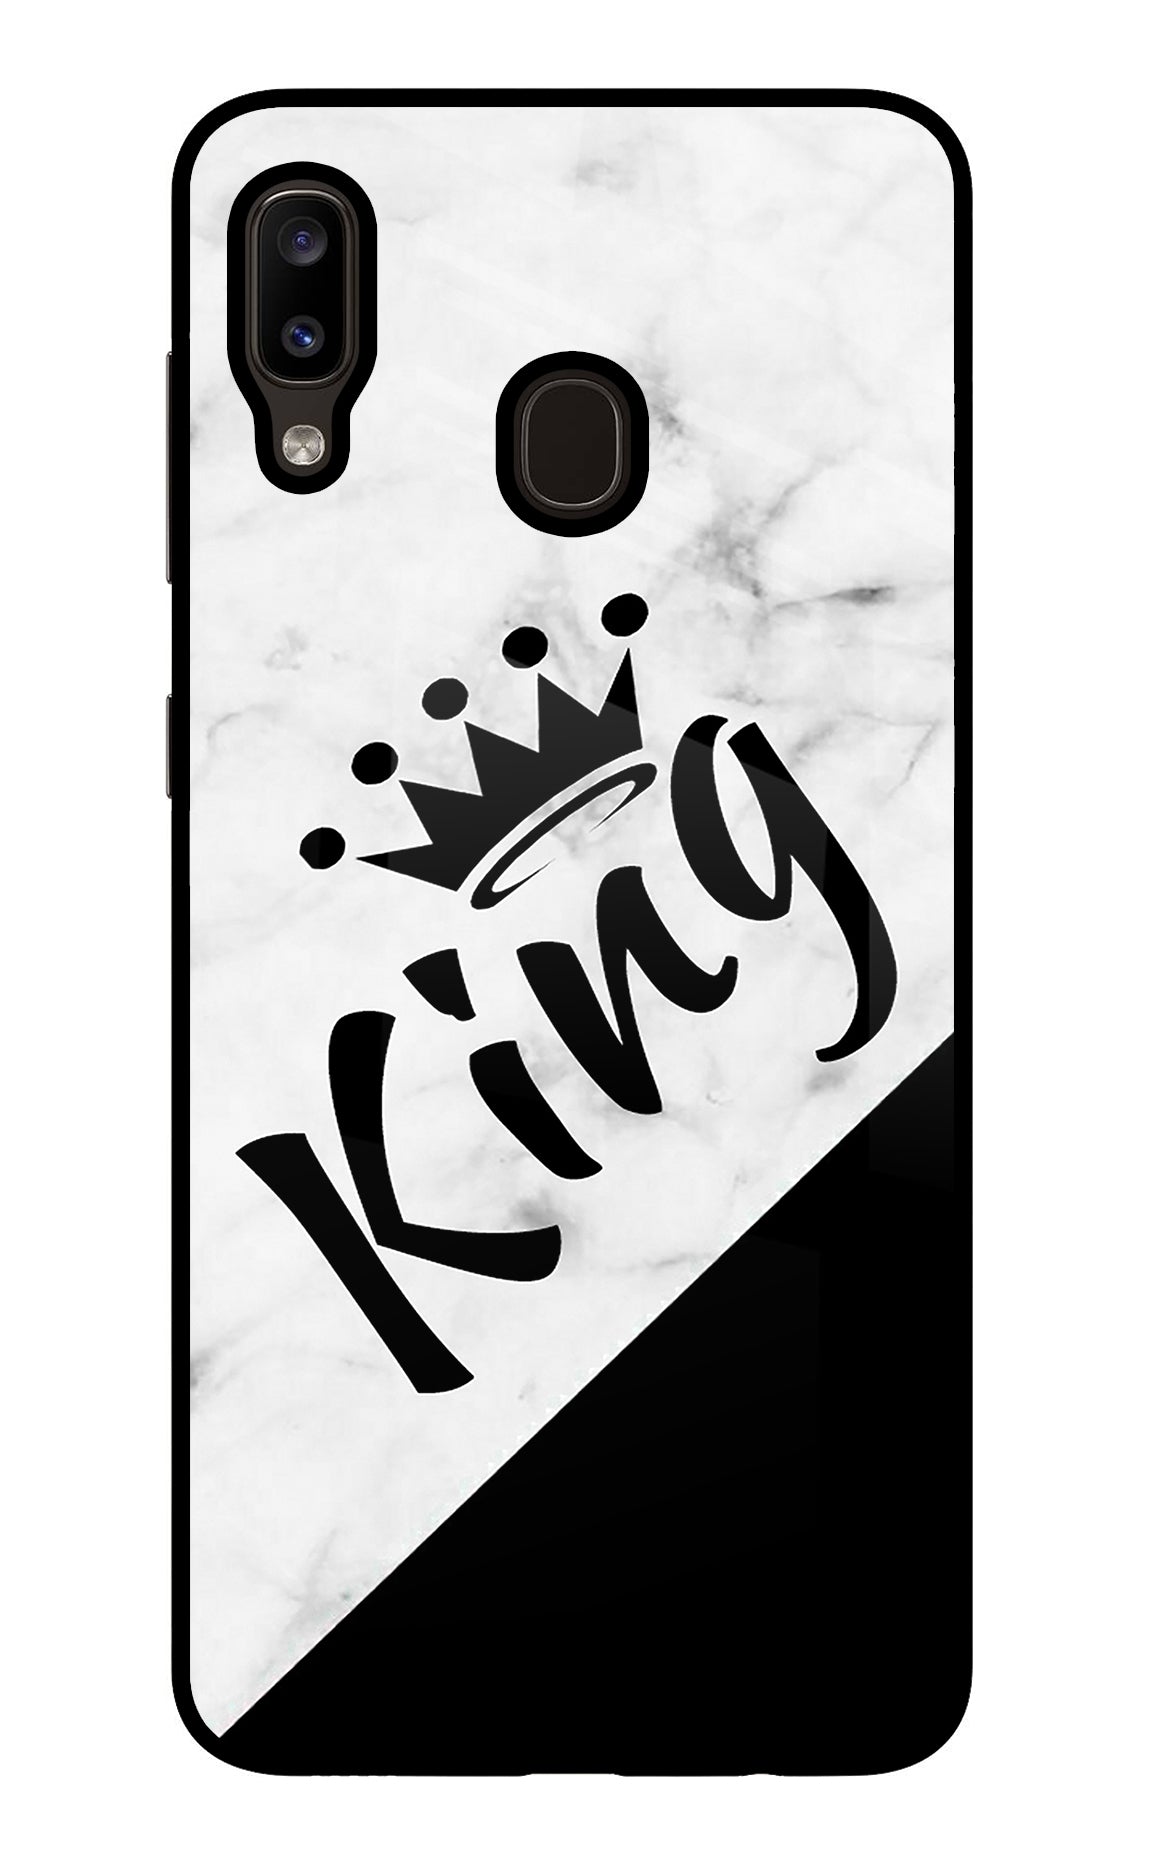 King Samsung A20/M10s Back Cover